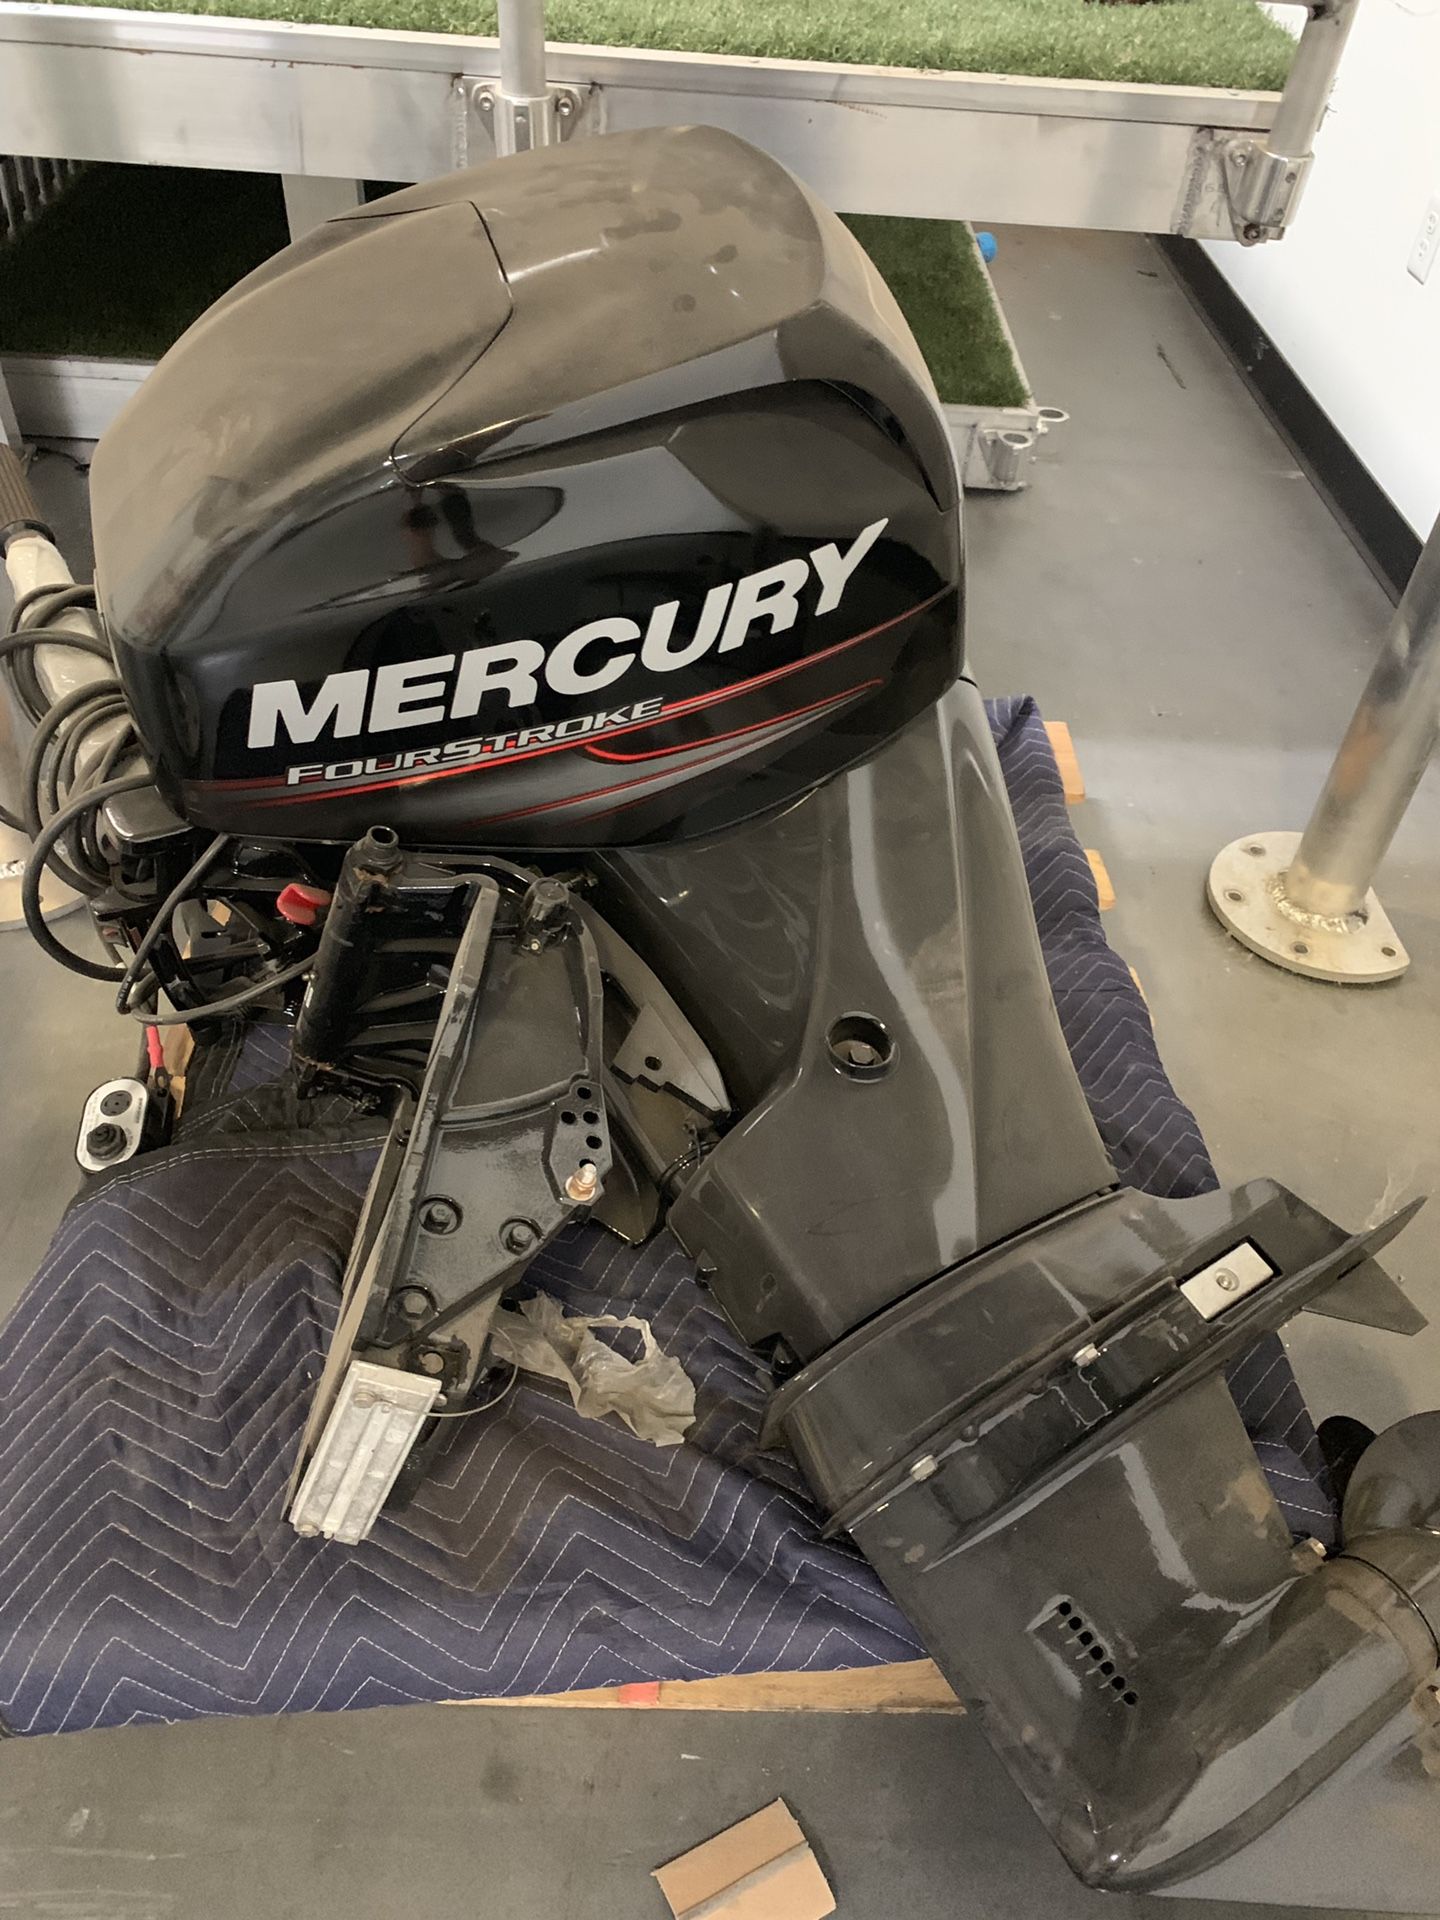 Mercury 40 hp outboard motor brand new 0 hours